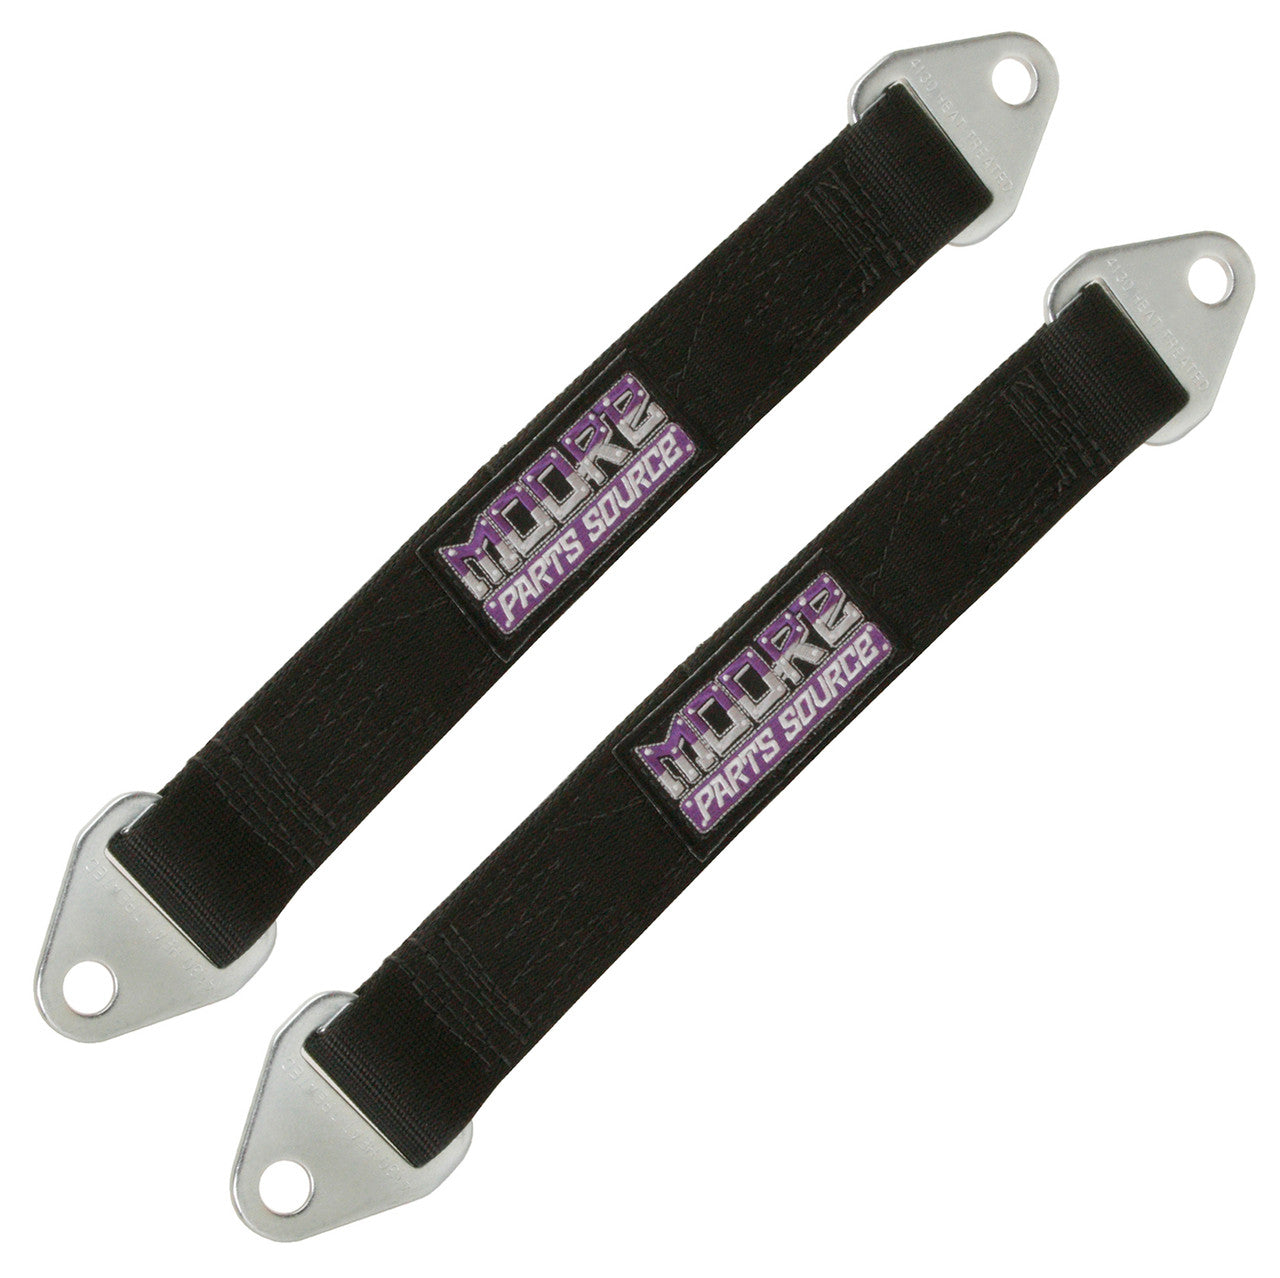 29 Inch USA Made Off-Road Suspension Limit Straps, Sold As Pair